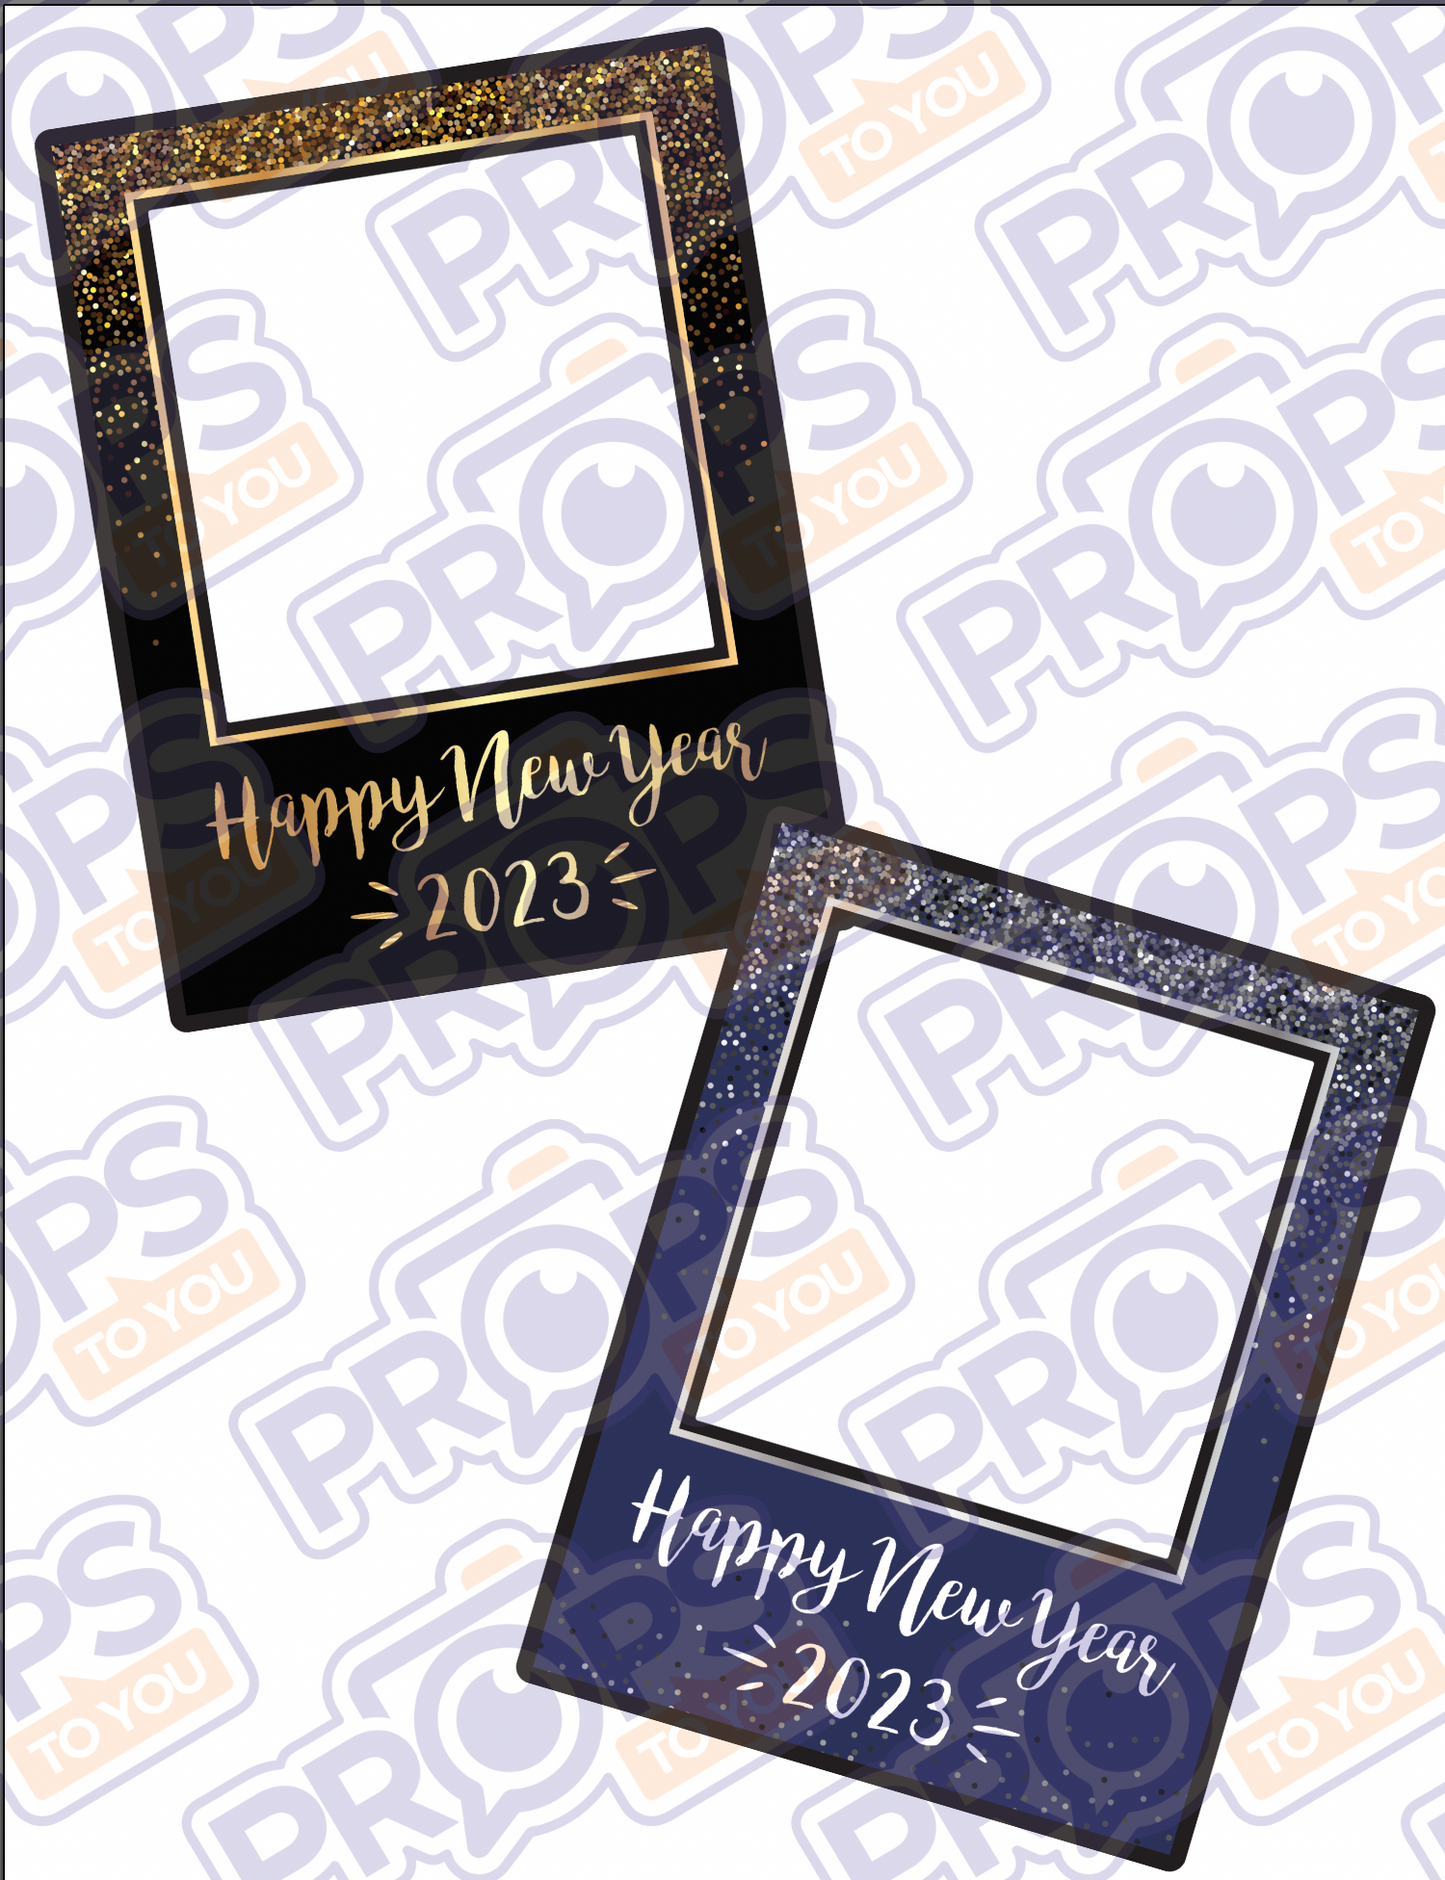 HUGE Props: New Years! Confetti Frame Photo Booth Prop